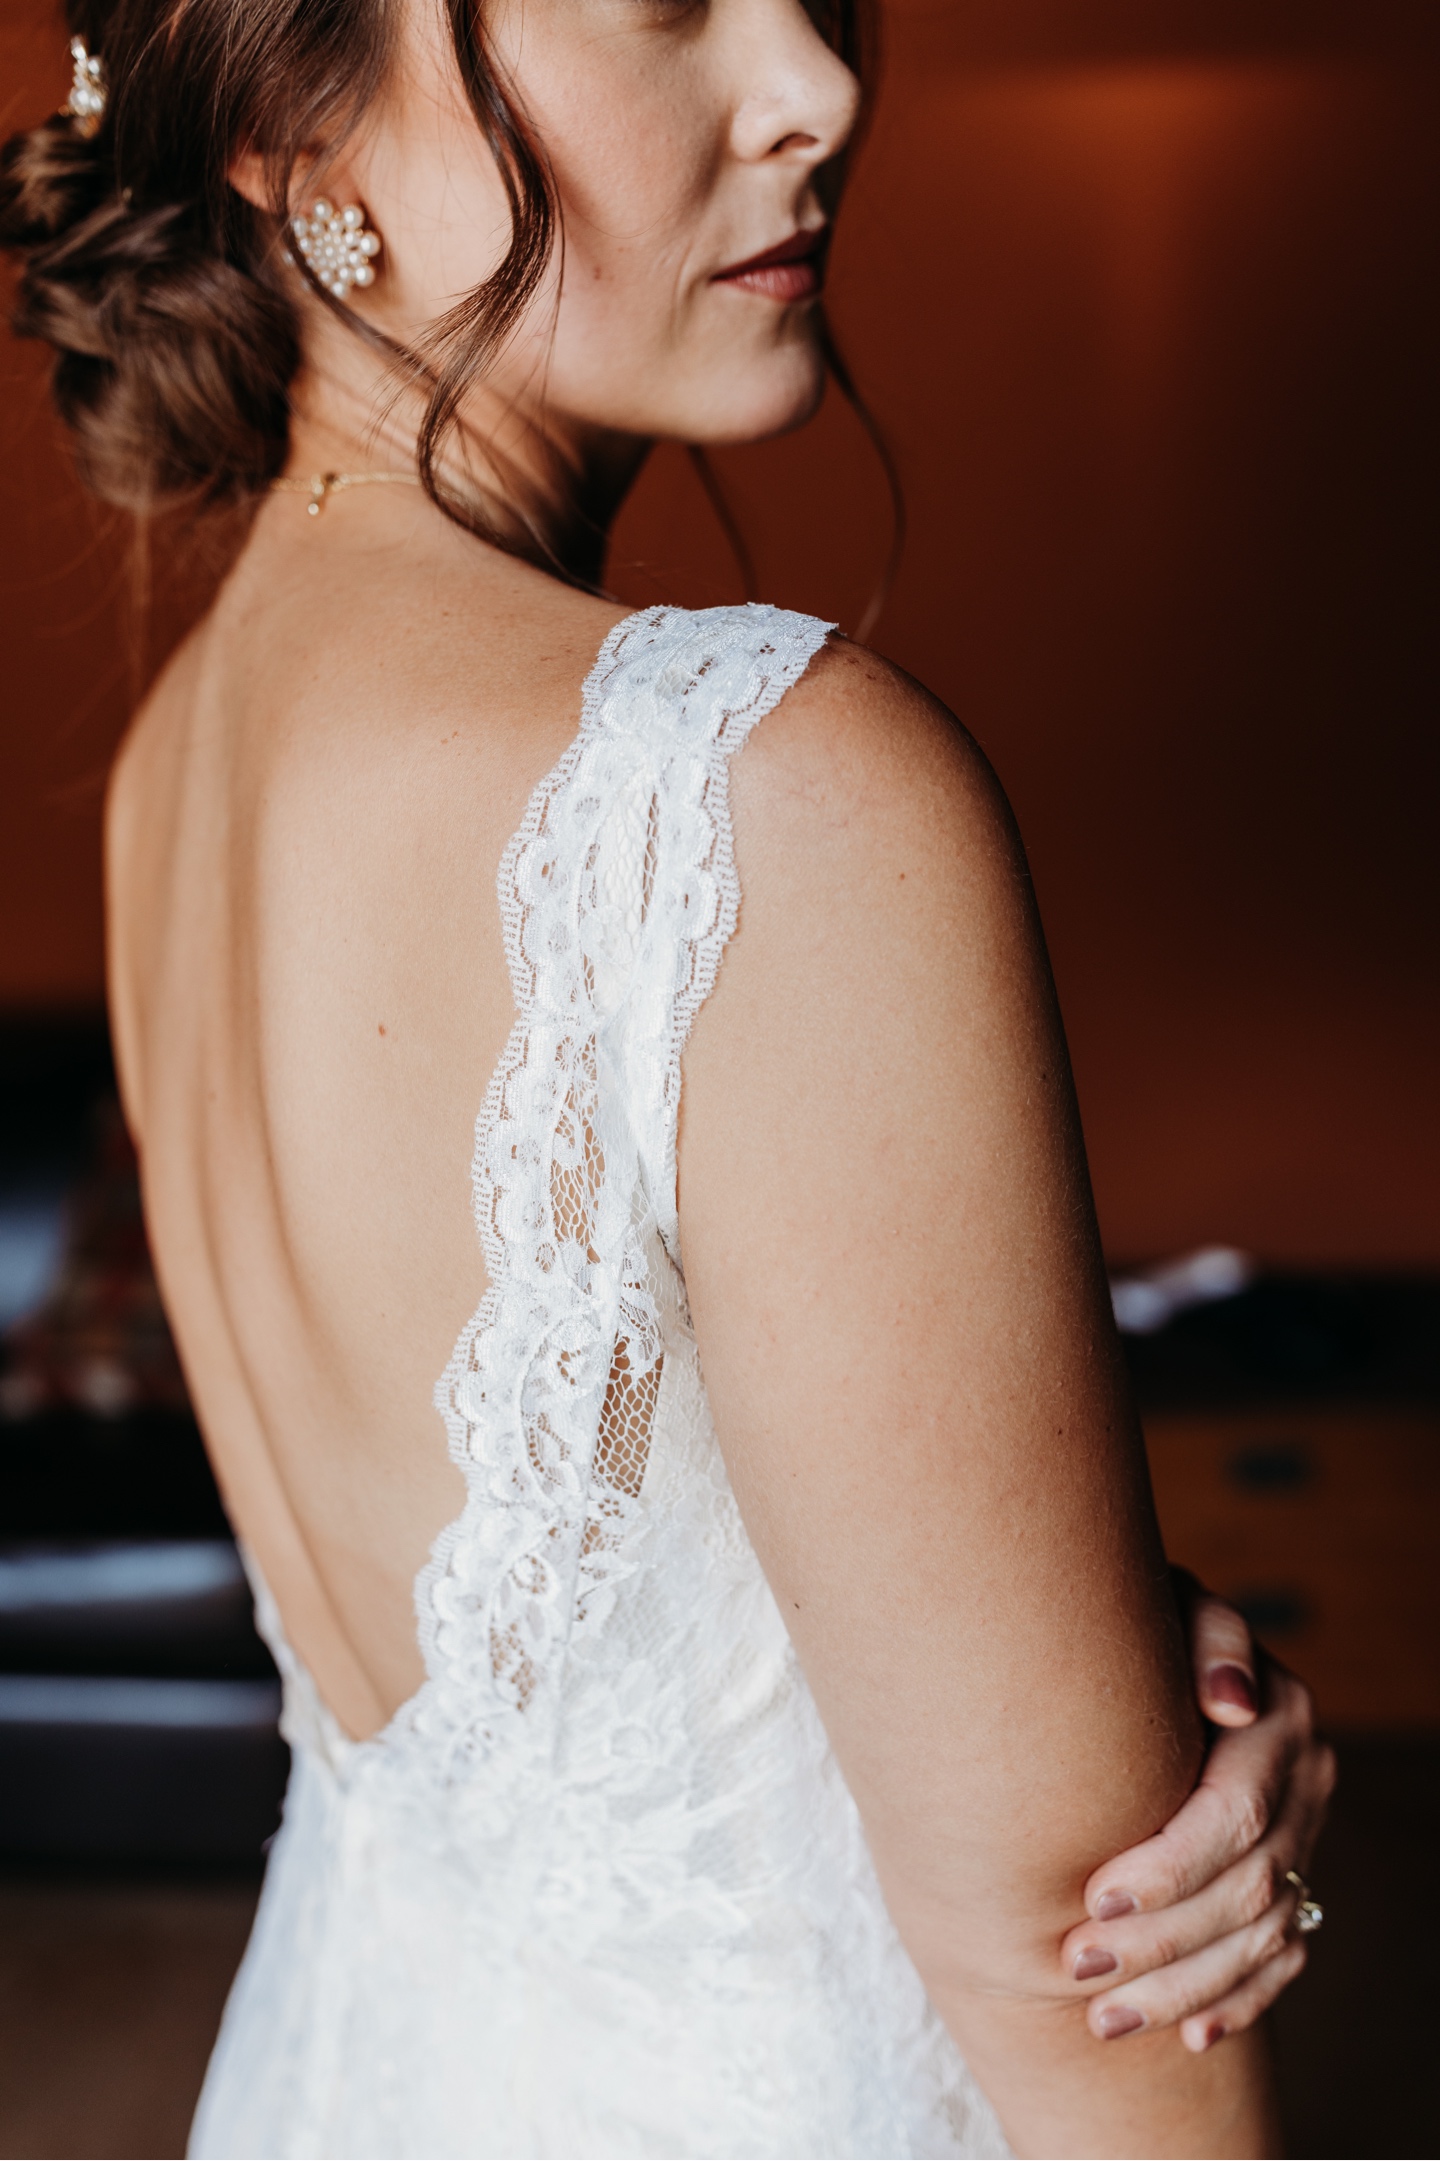 Close up of the bride looking over her shoulder in her white lace wedding dress. Sacramento wedding photography by Liz Koston.